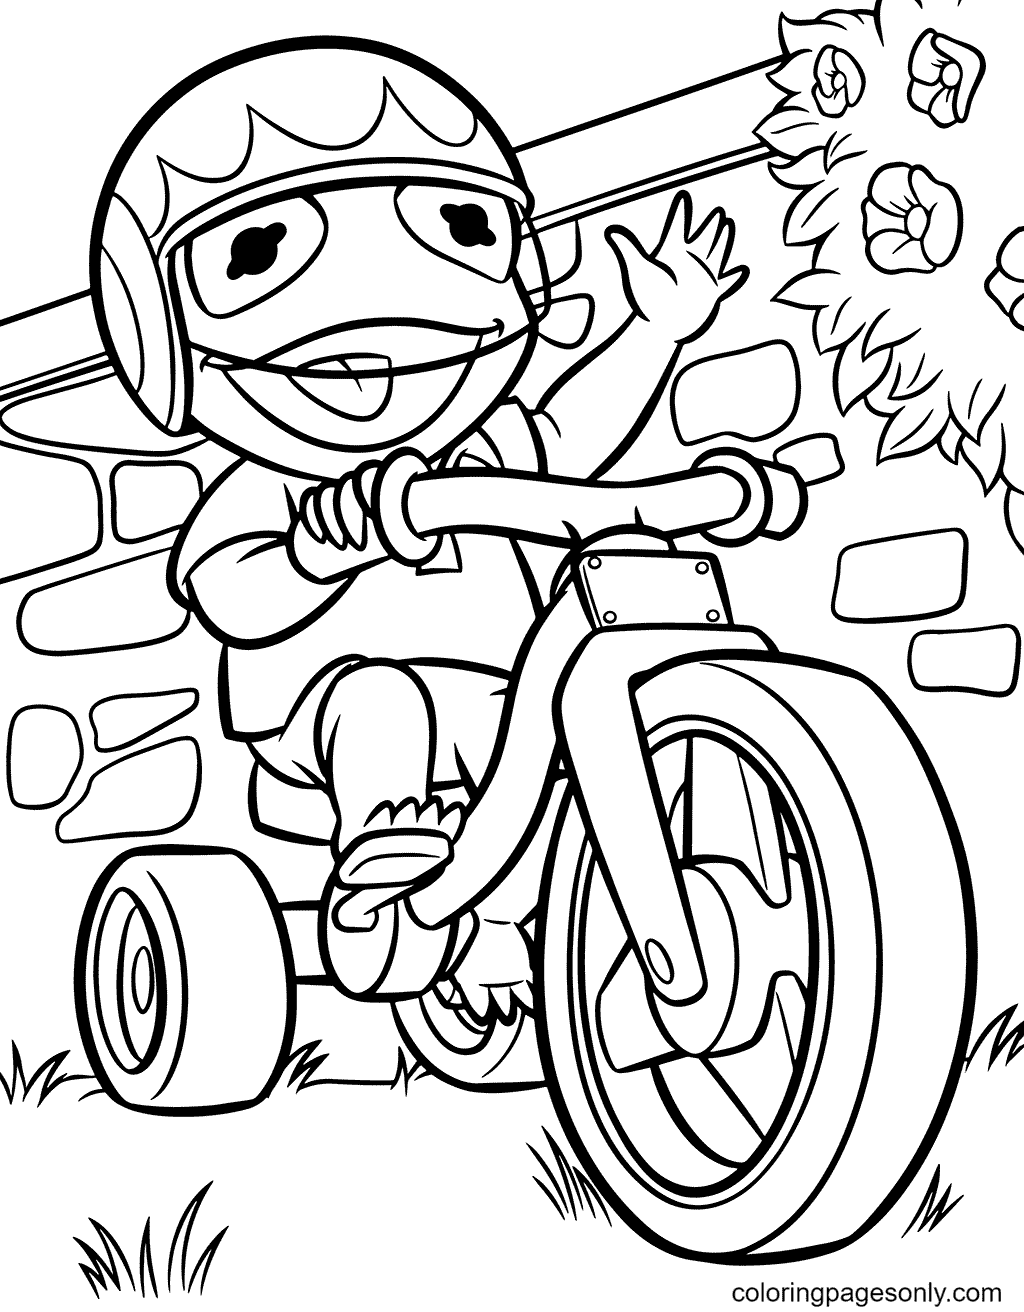 Kermit Racer Coloring Page